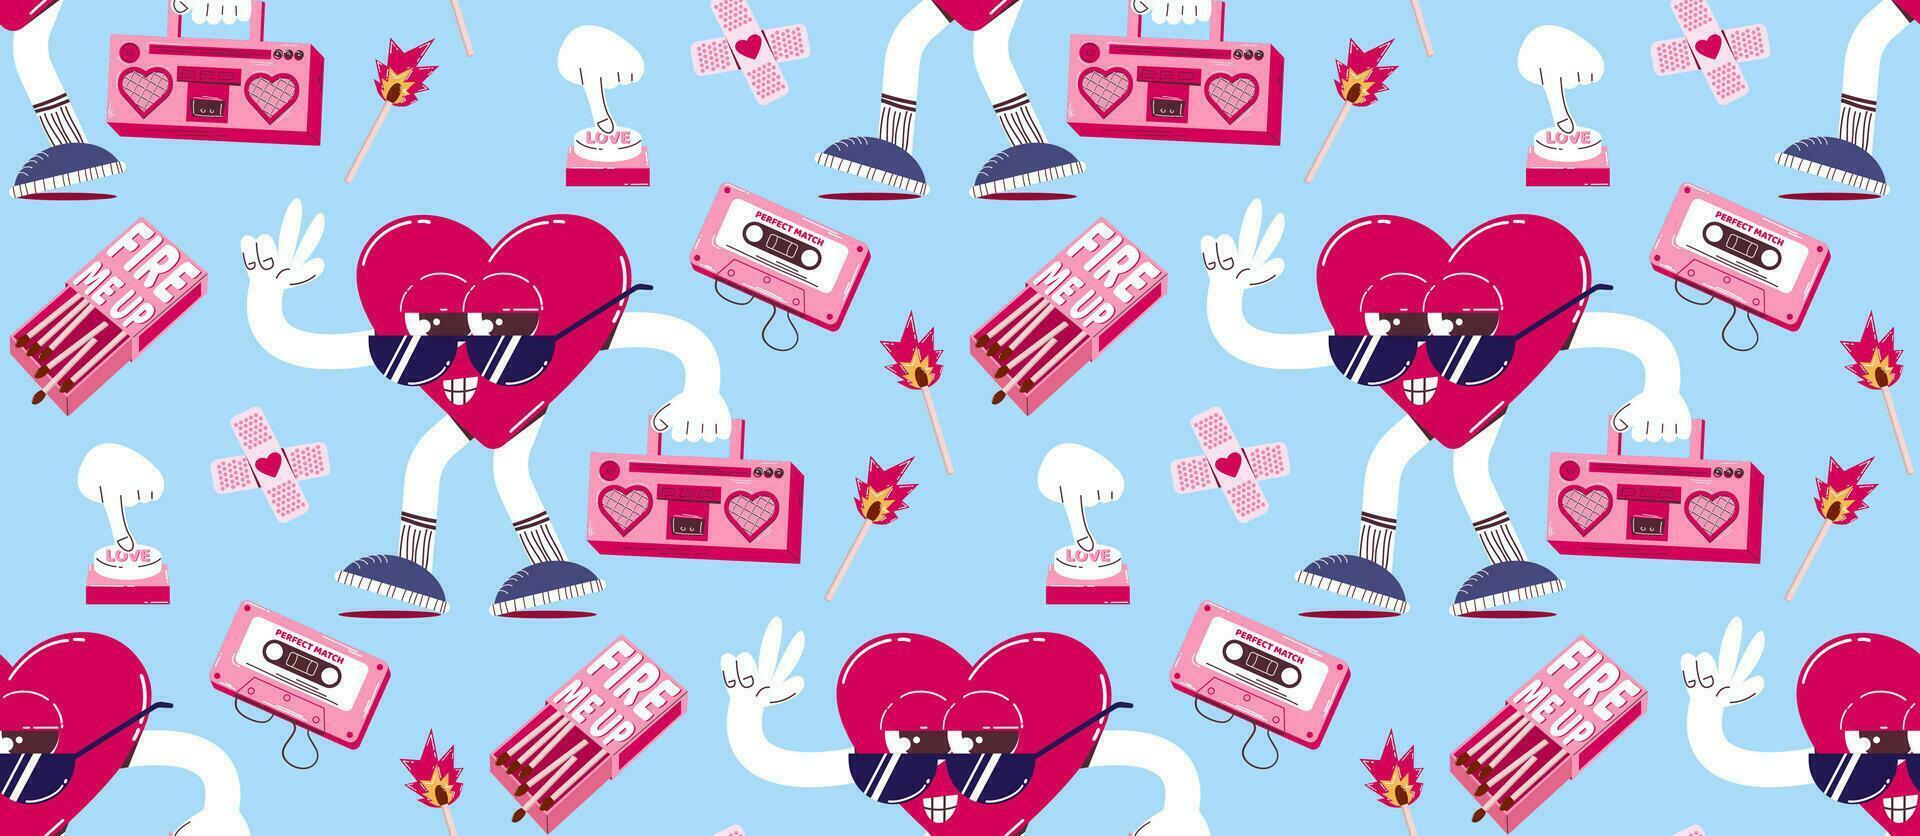 Pattern with cute heart character and old tape recorder, pink matches, love button and other elements in retro cartoon style. Vector background for Valentine's Day.